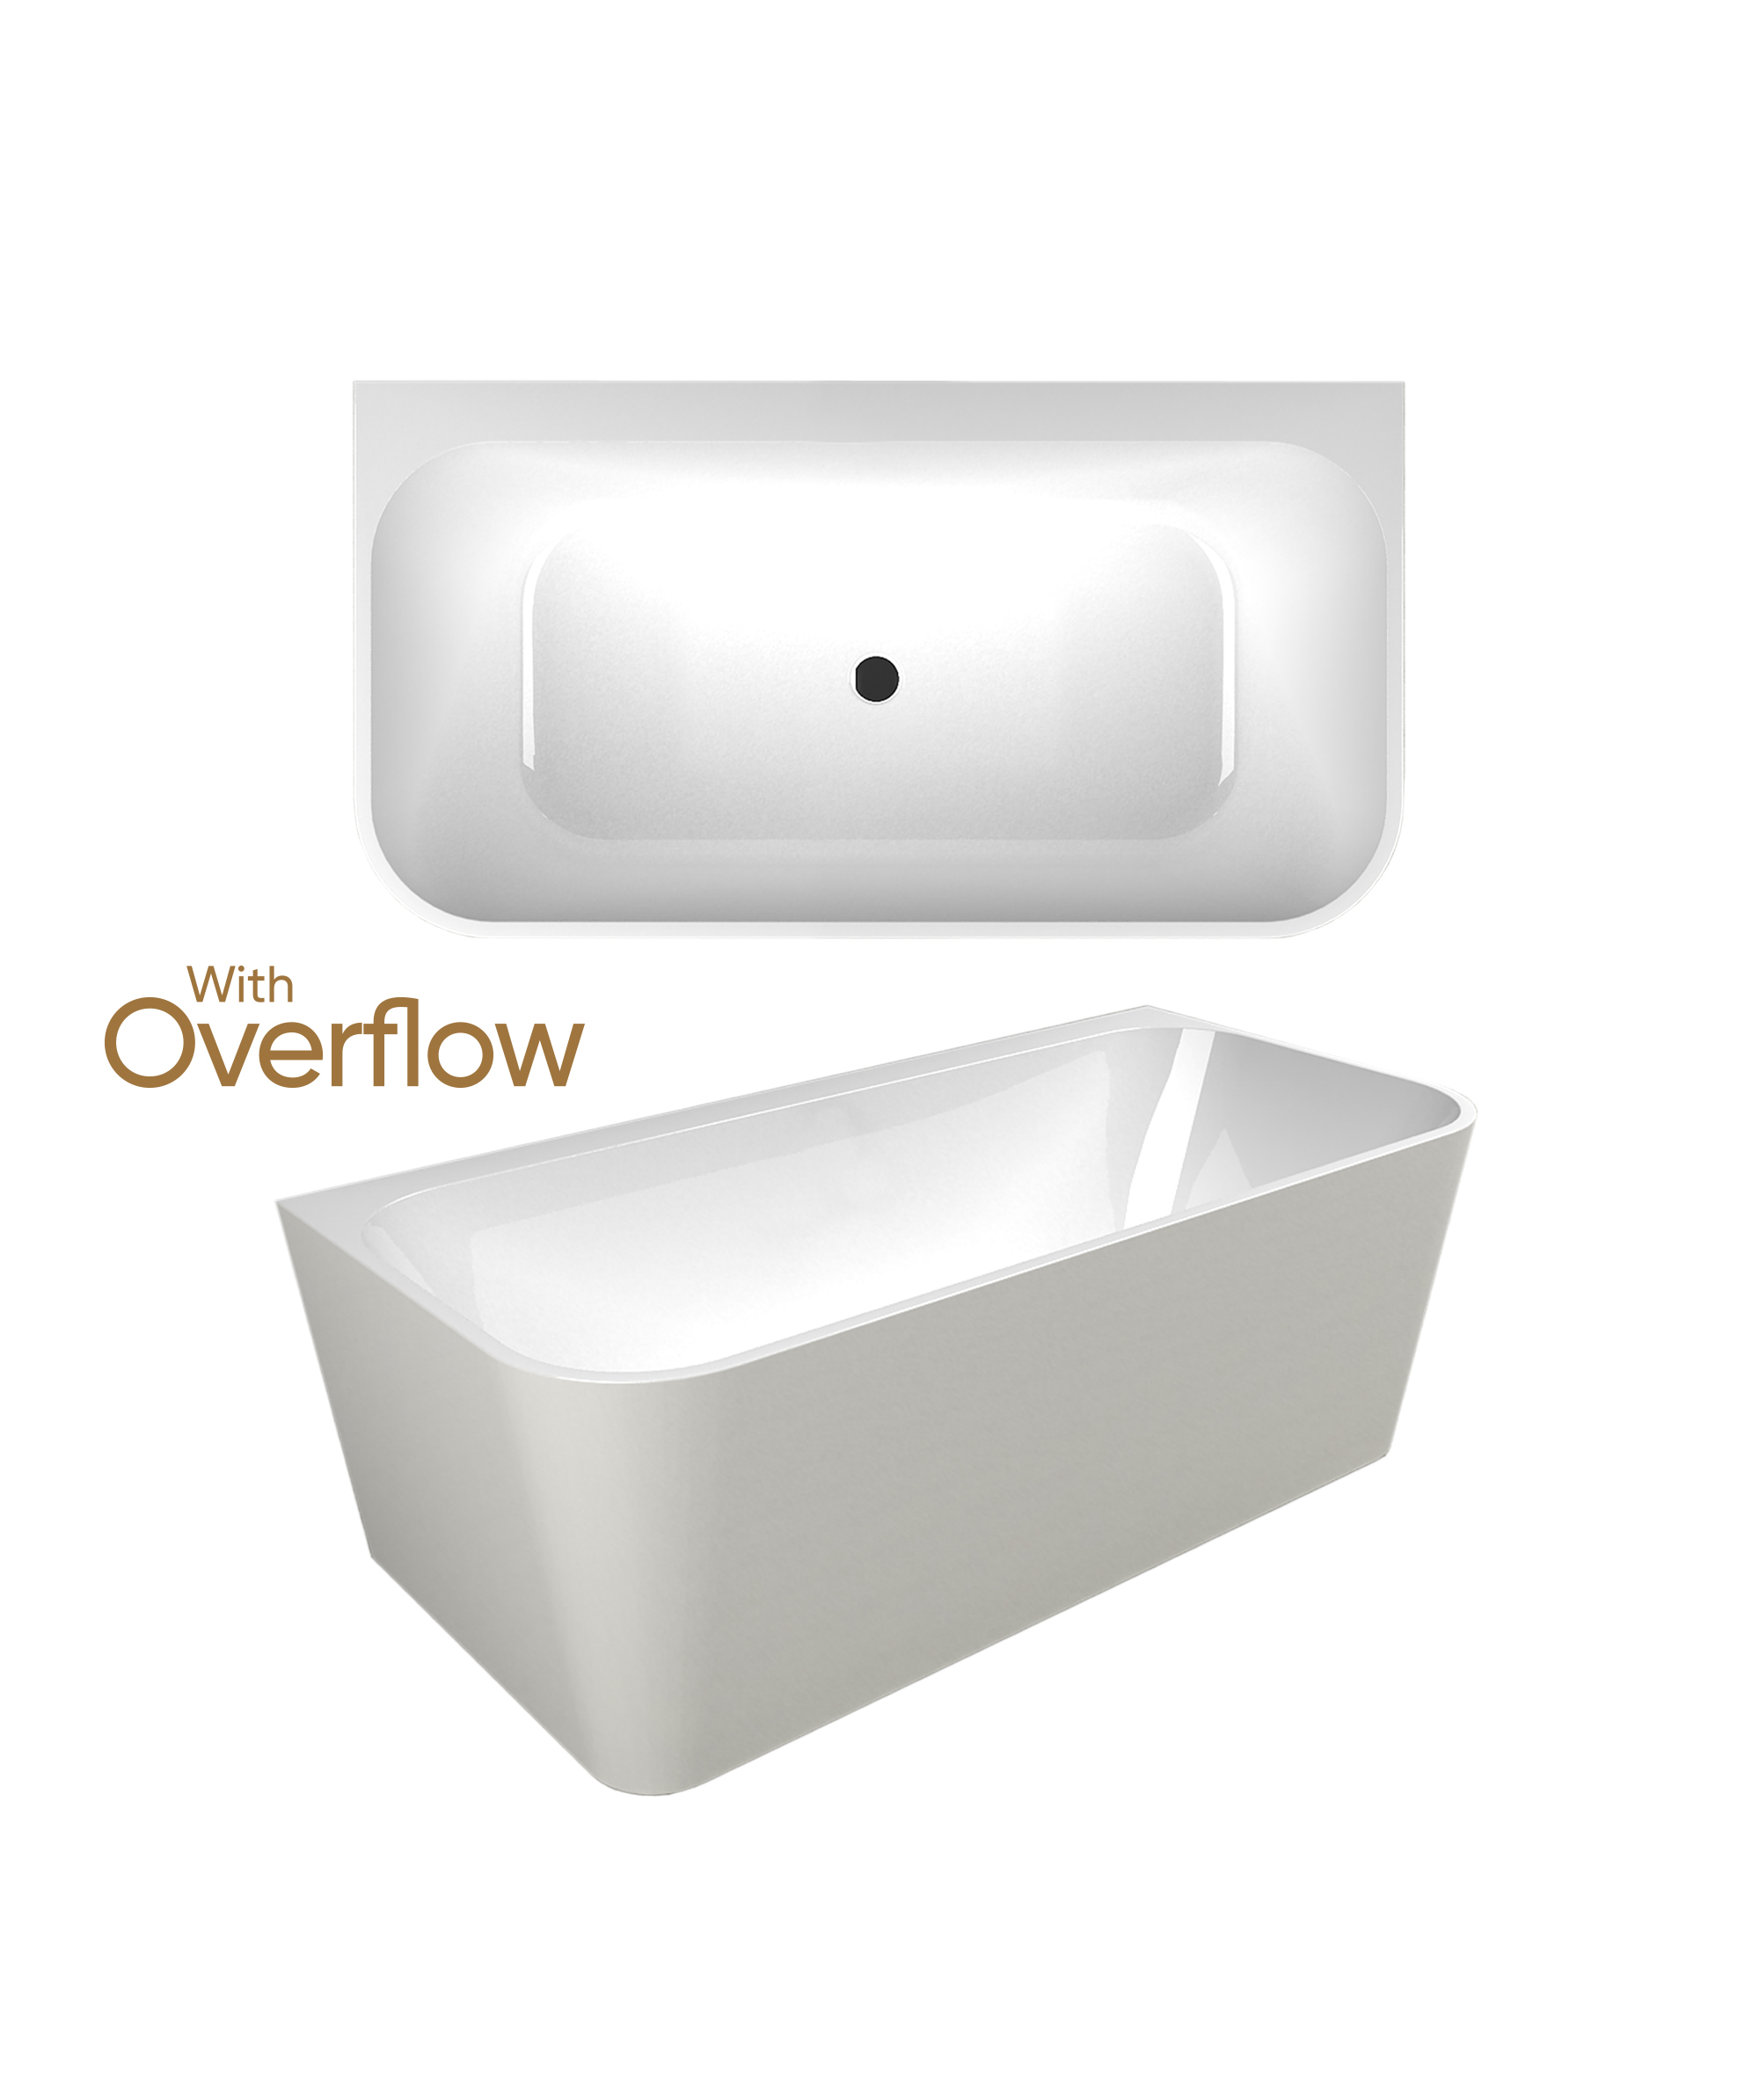 Plati 130 Back-to-wall freestanding bath - with overflow and Pop-out Waste